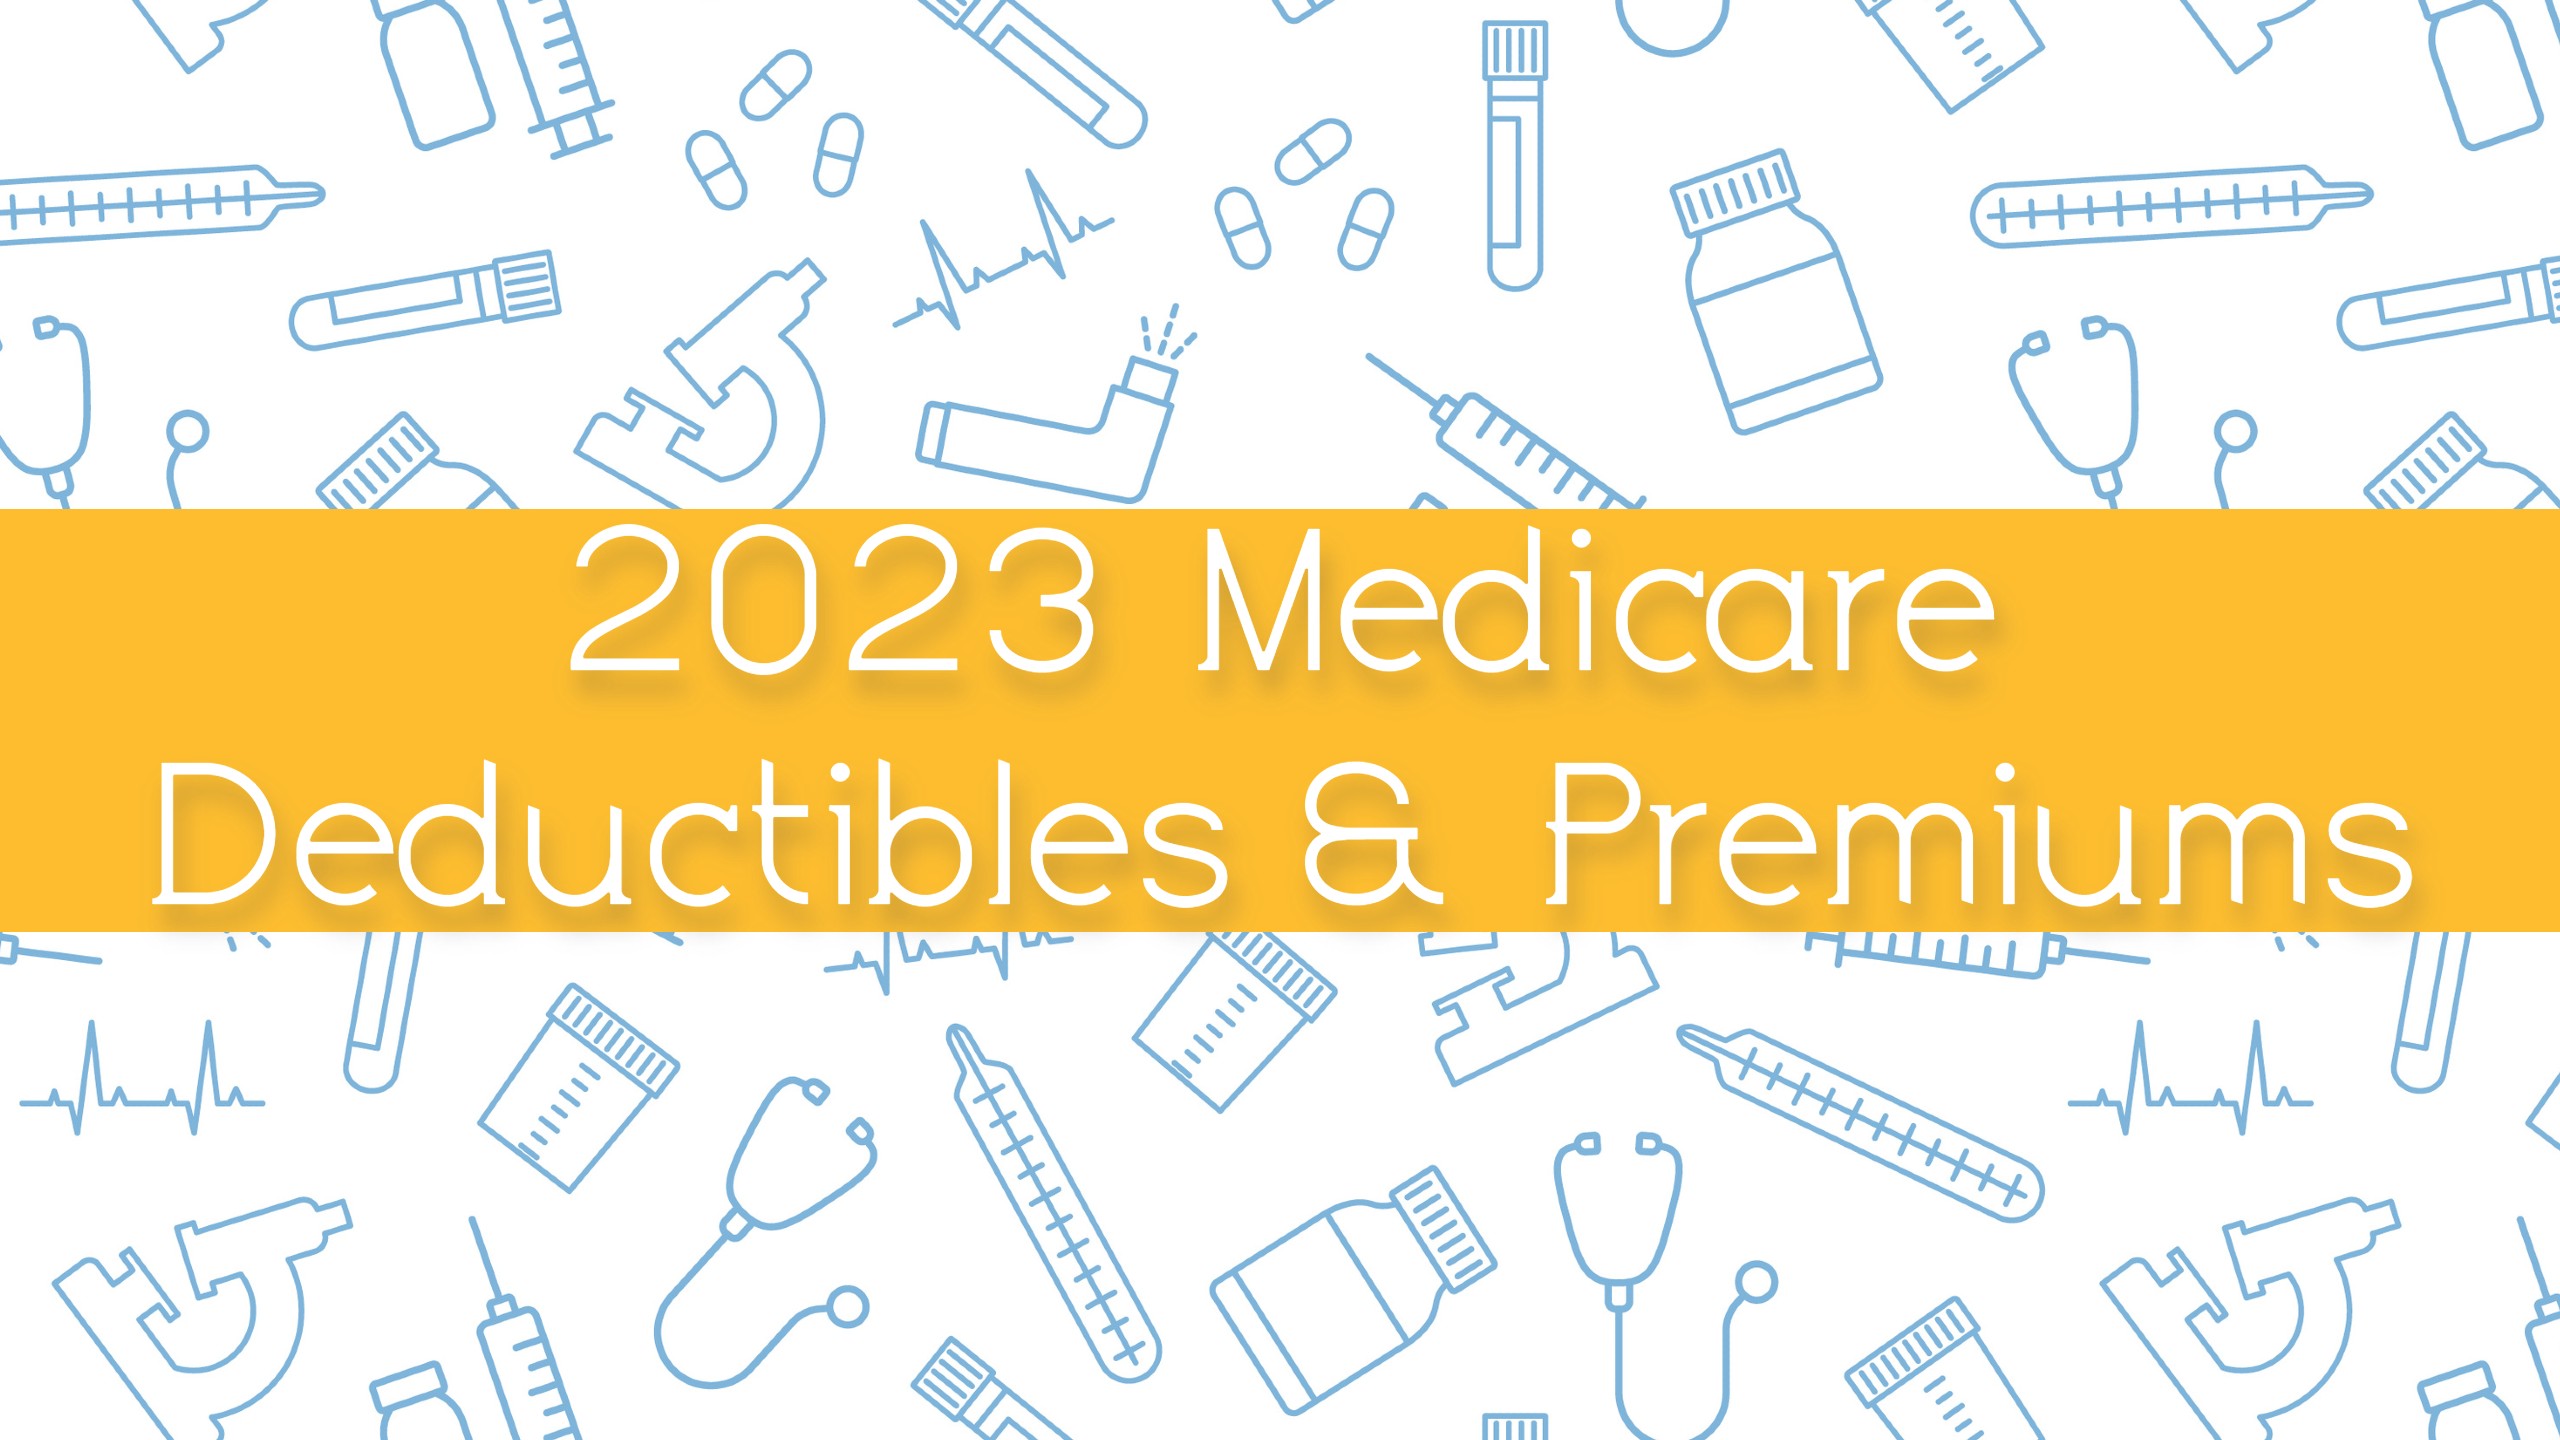 2023 Medicare Deductibles & Premiums Released Early